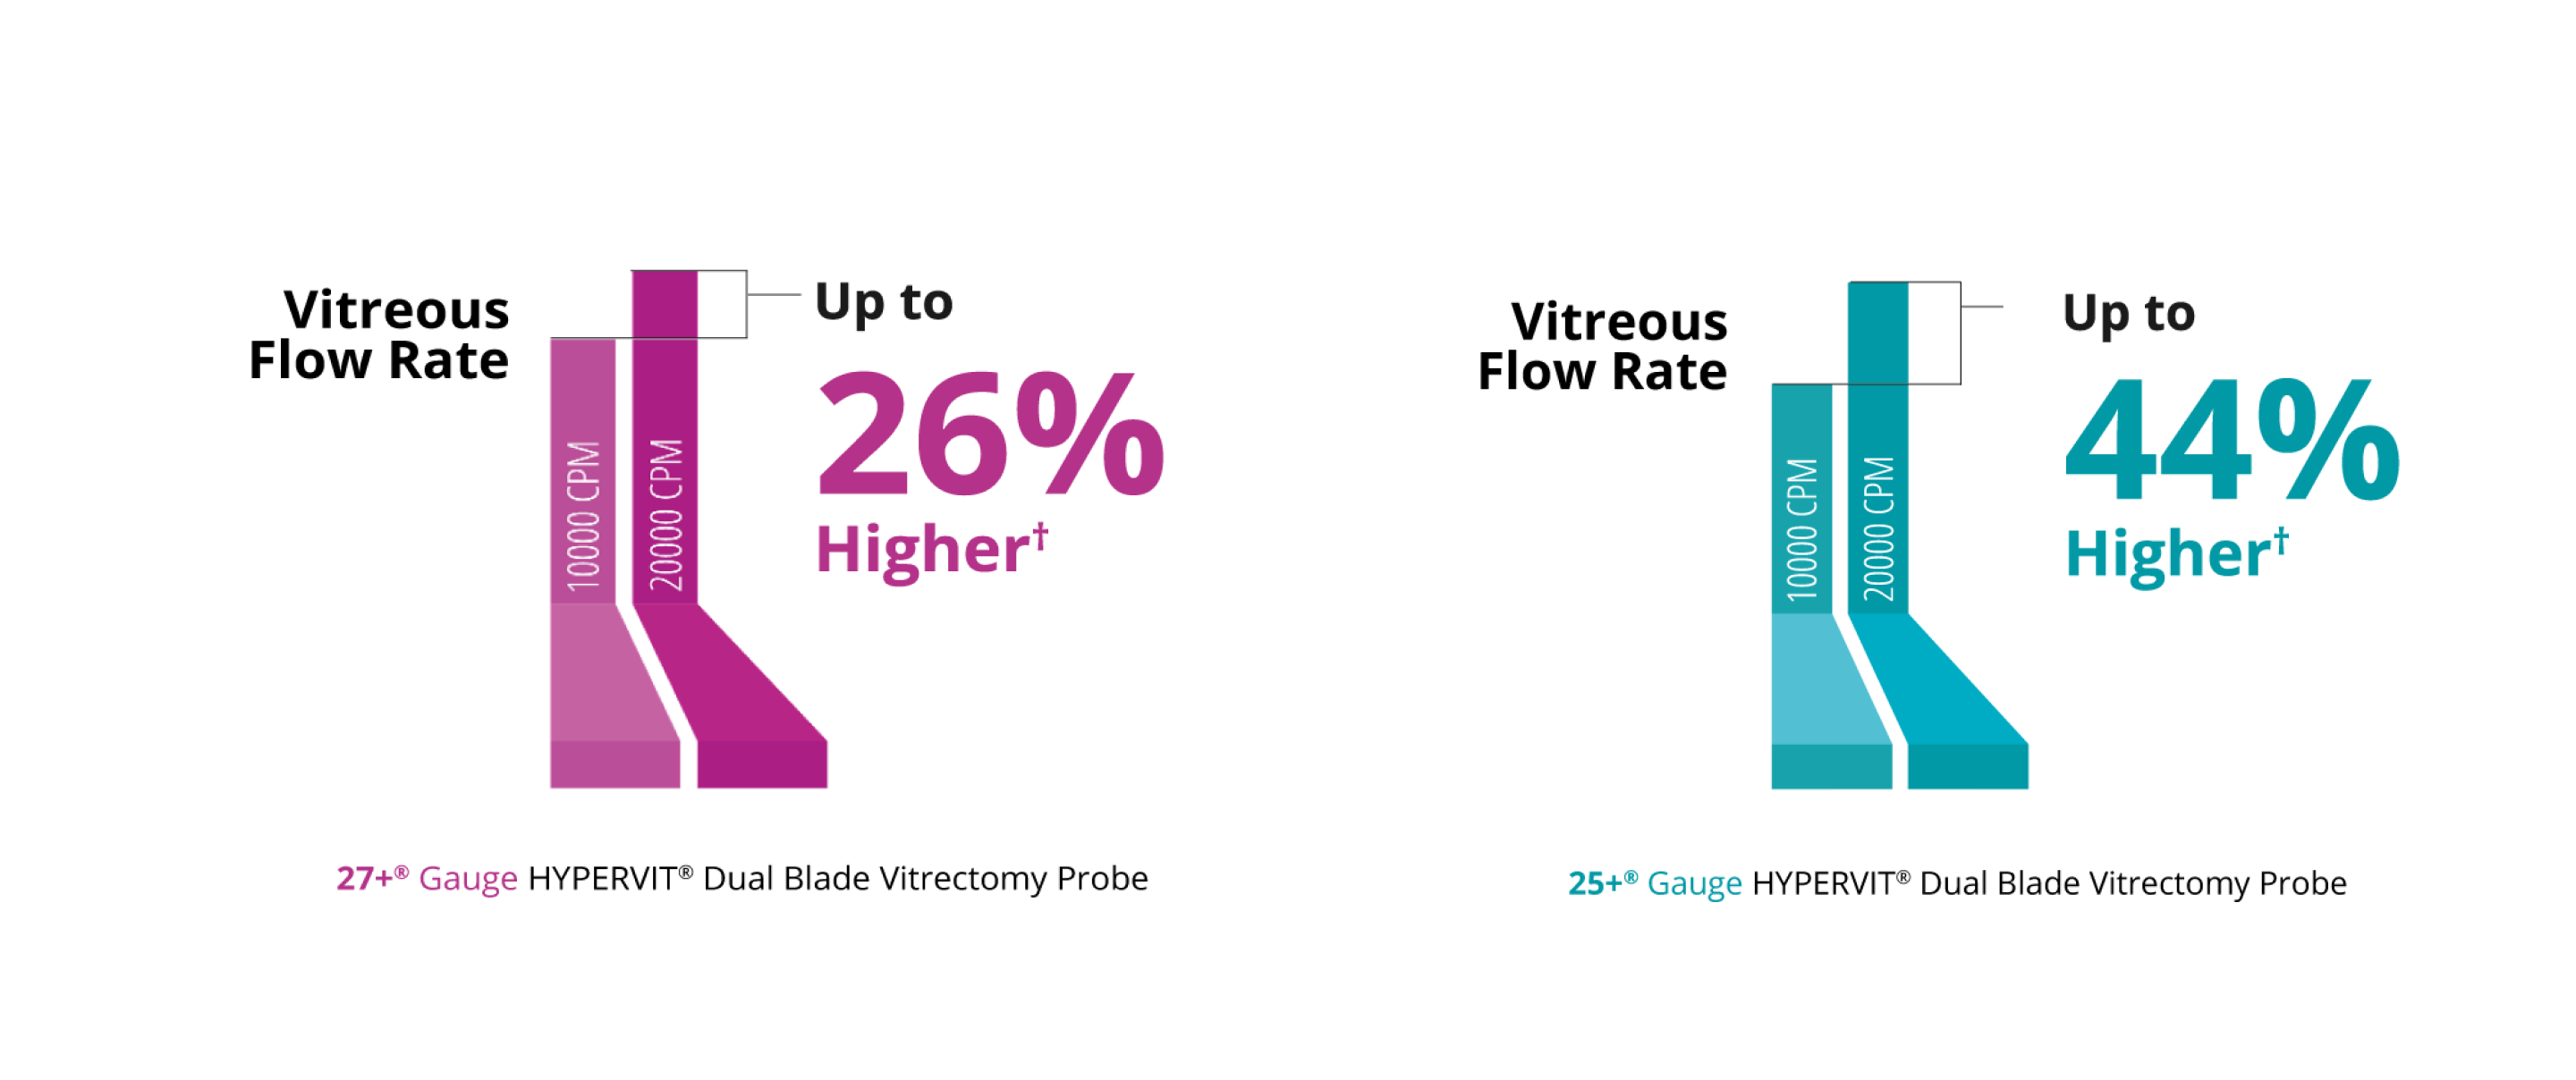 A bar graph comparing the vitreous flow rate between the 10K and 20K 27+ Gauge Hypervit probe. The 20K probe has a 26% higher vitreous flow rate.